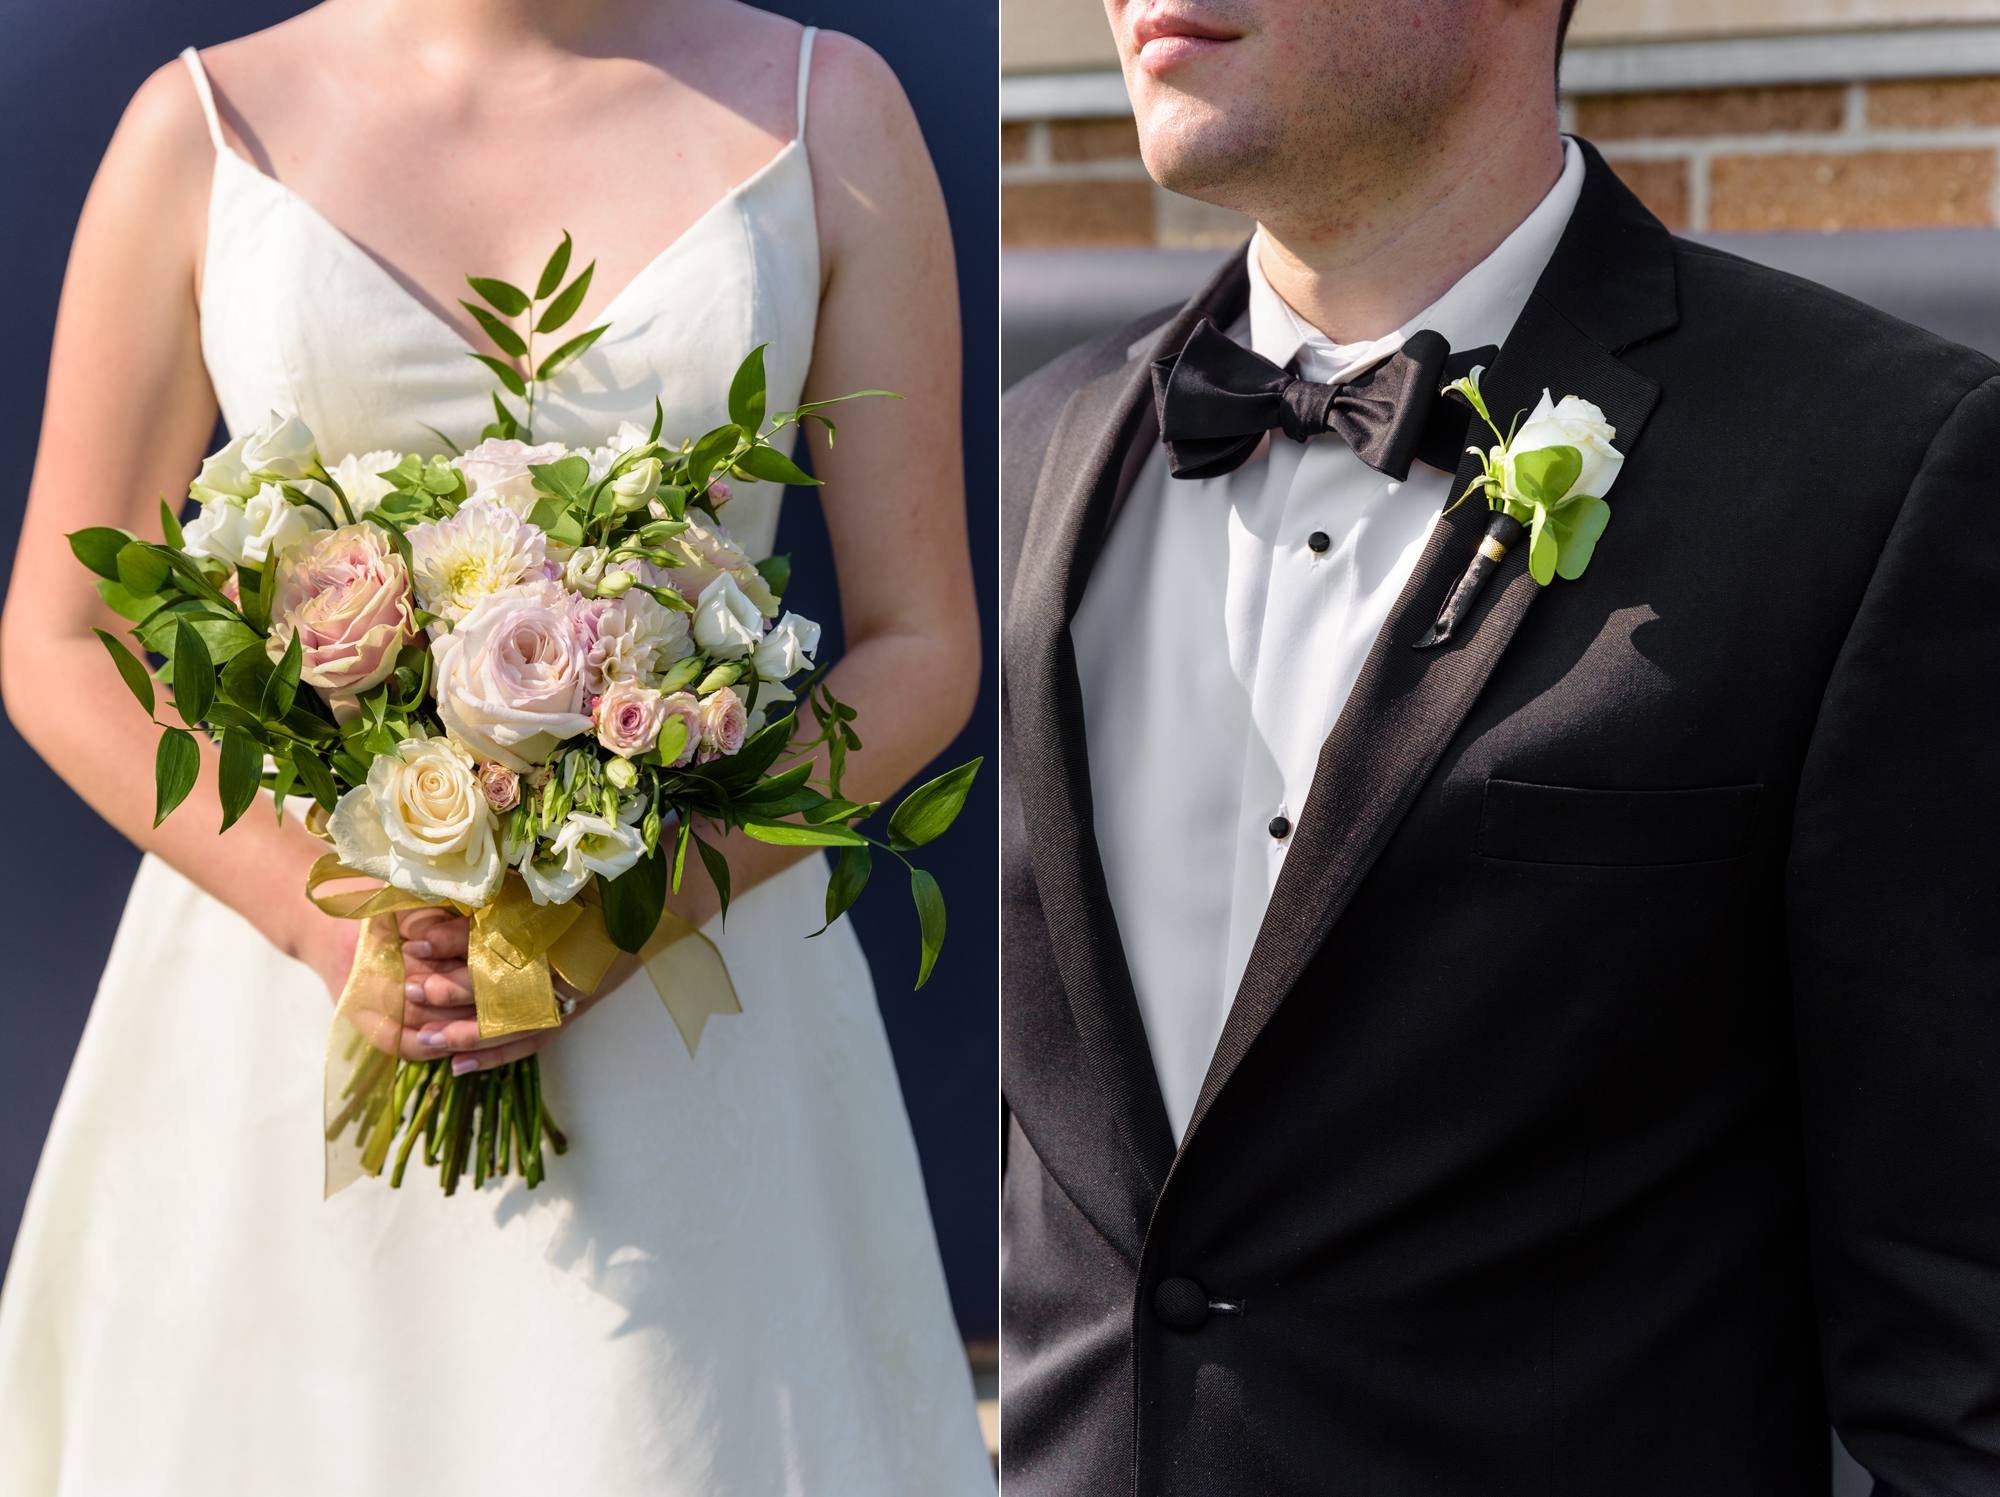 Bride's bouquet & Groom's boutonnieres by Always N Bloom for a wedding at the Basilica of the Sacred Heart on the campus of the University of Notre Dame